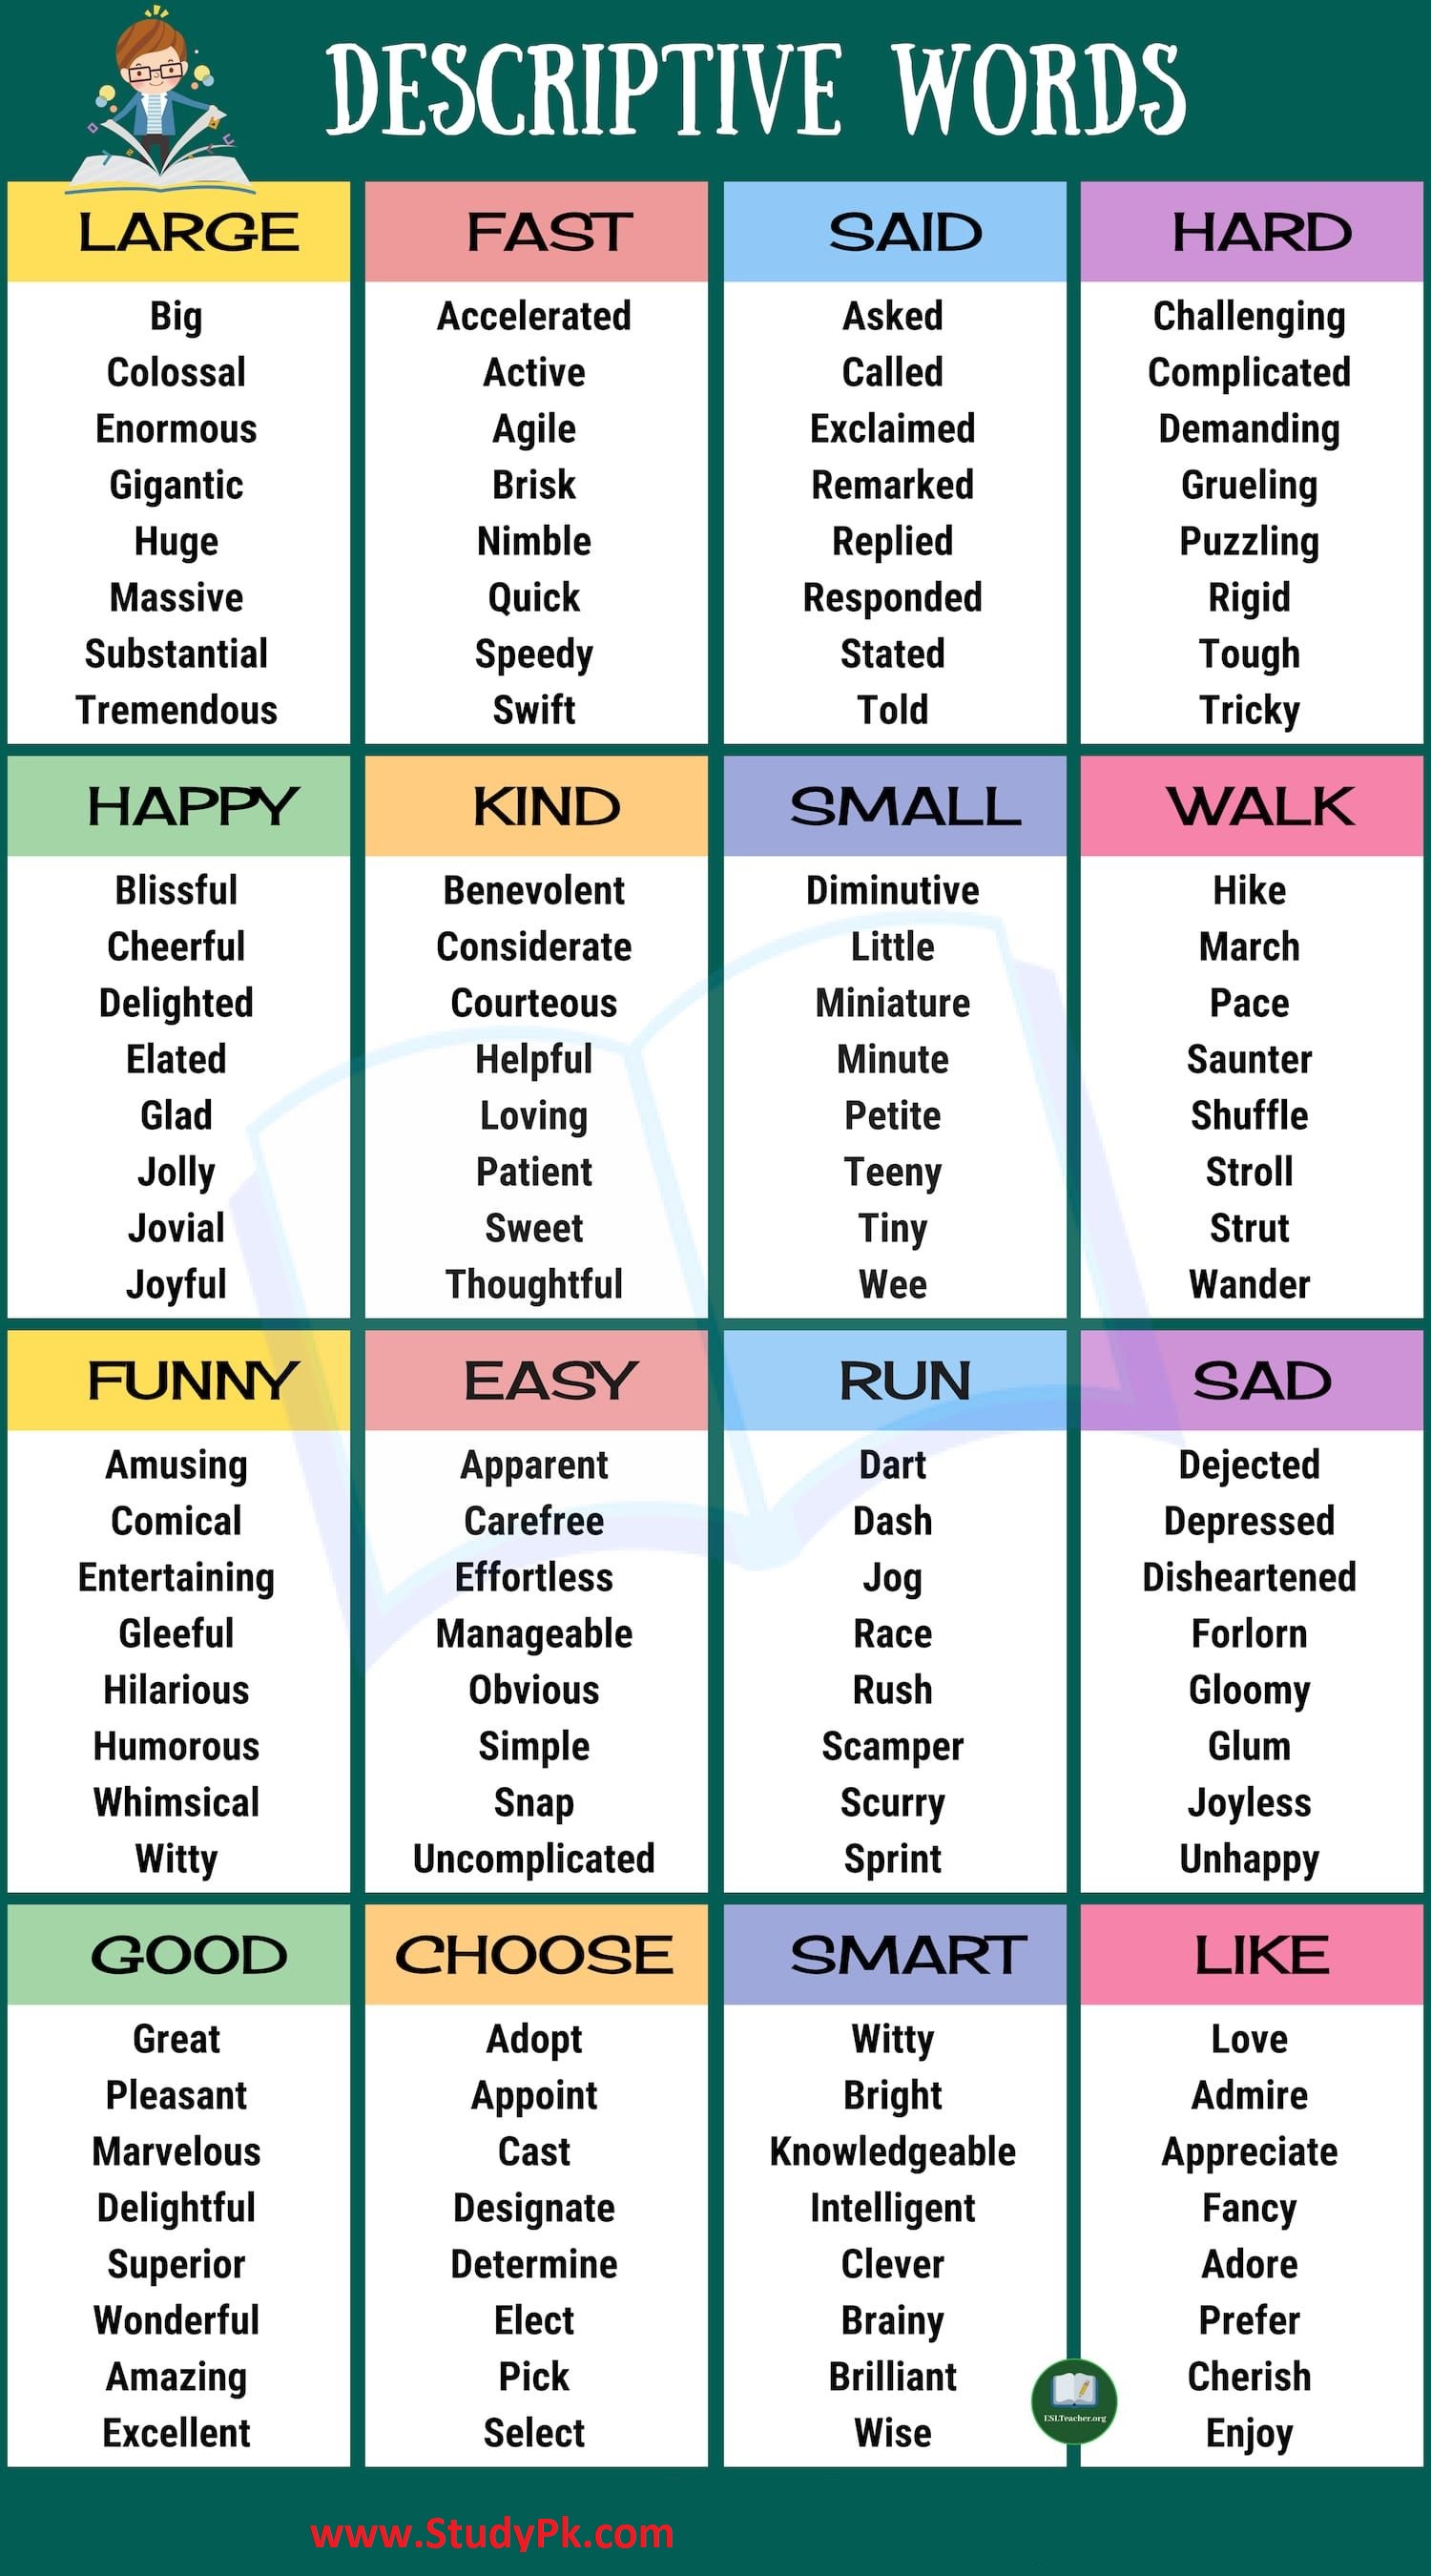 List of Descriptive Words: Adjectives, Adverbs and Gerunds in English